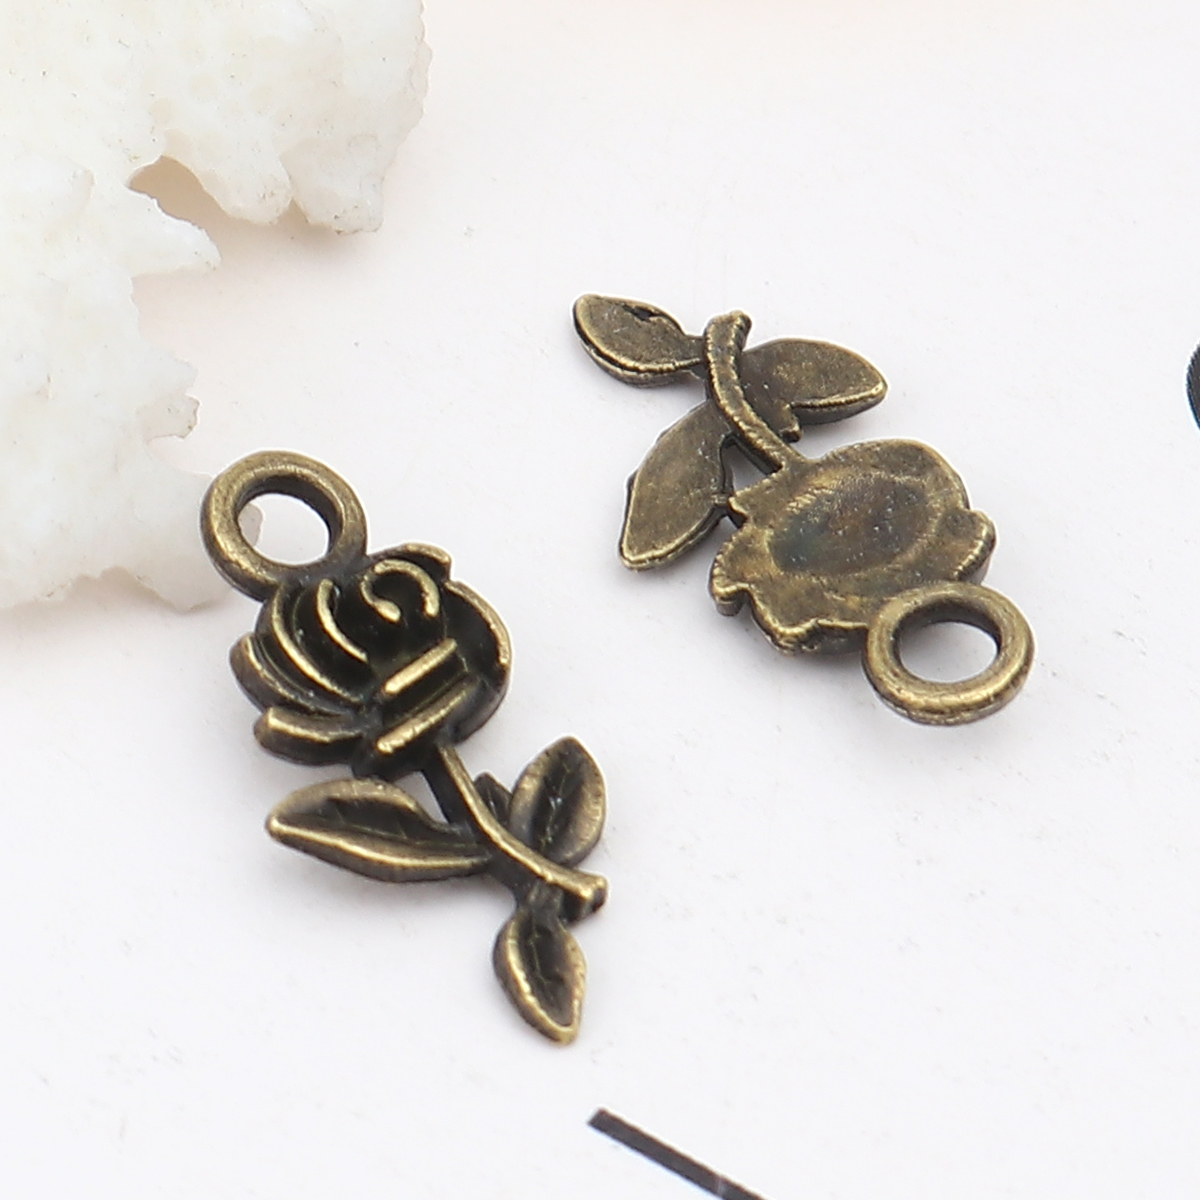 Picture of Zinc Based Alloy Valentine's Day Charms Rose Flower Antique Bronze 21mm x 10mm, 50 PCs